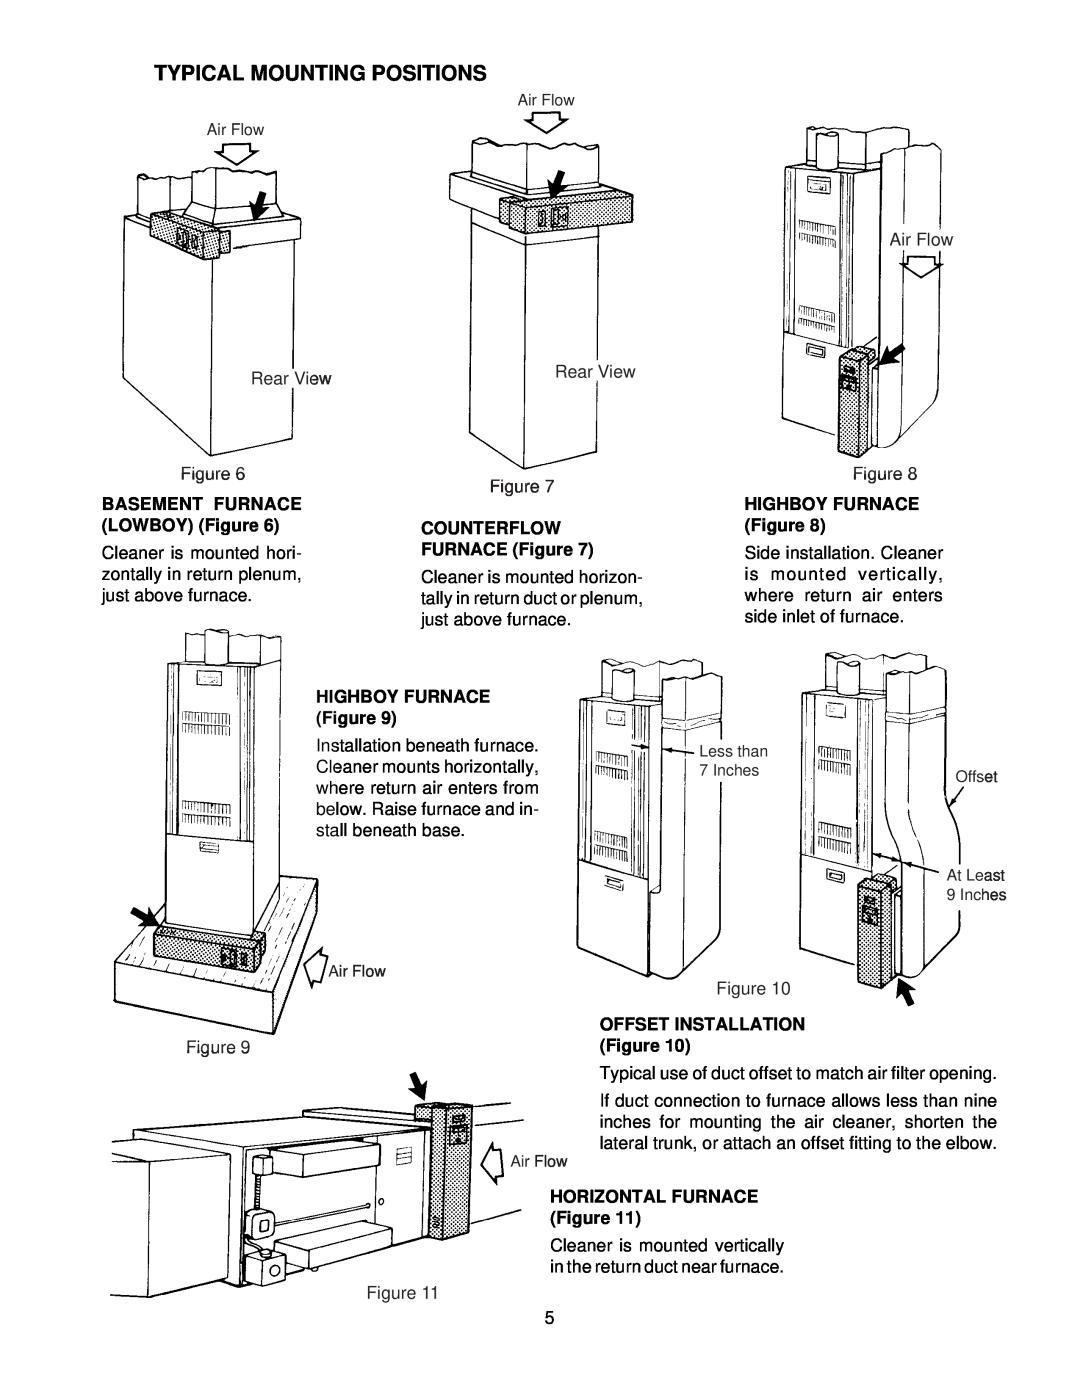 Emerson 16C26S-010 owner manual Typical Mounting Positions, BASEMENT FURNACE LOWBOY Figure, COUNTERFLOW FURNACE Figure 